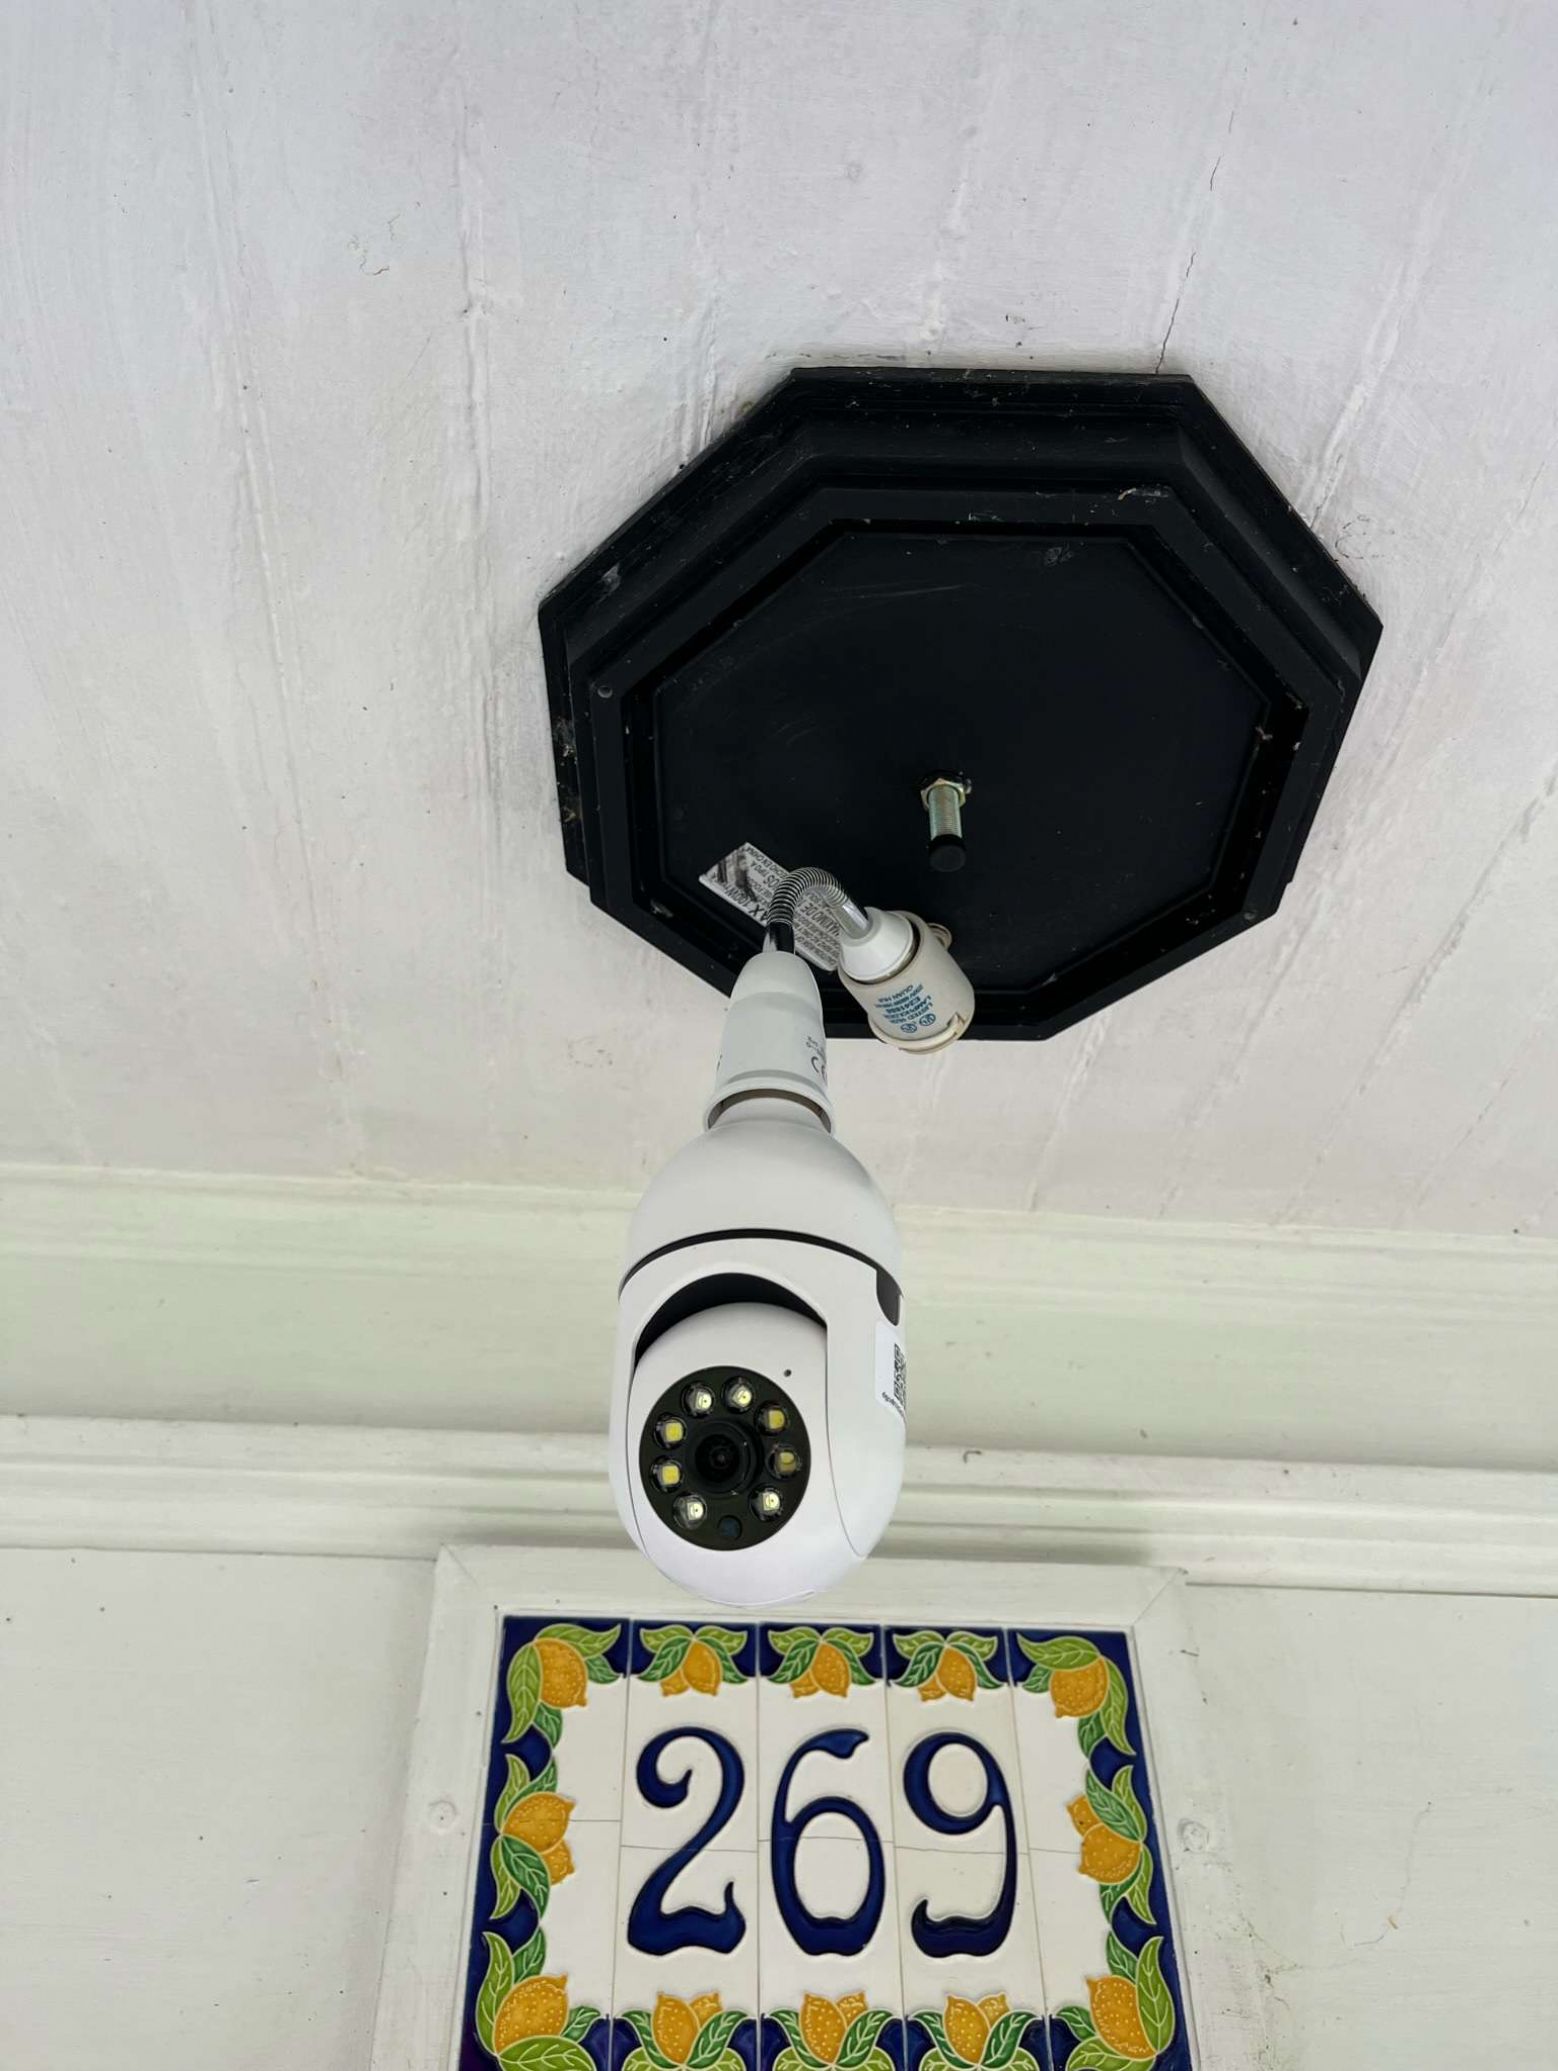 Nomad Security Camera Negative Comments